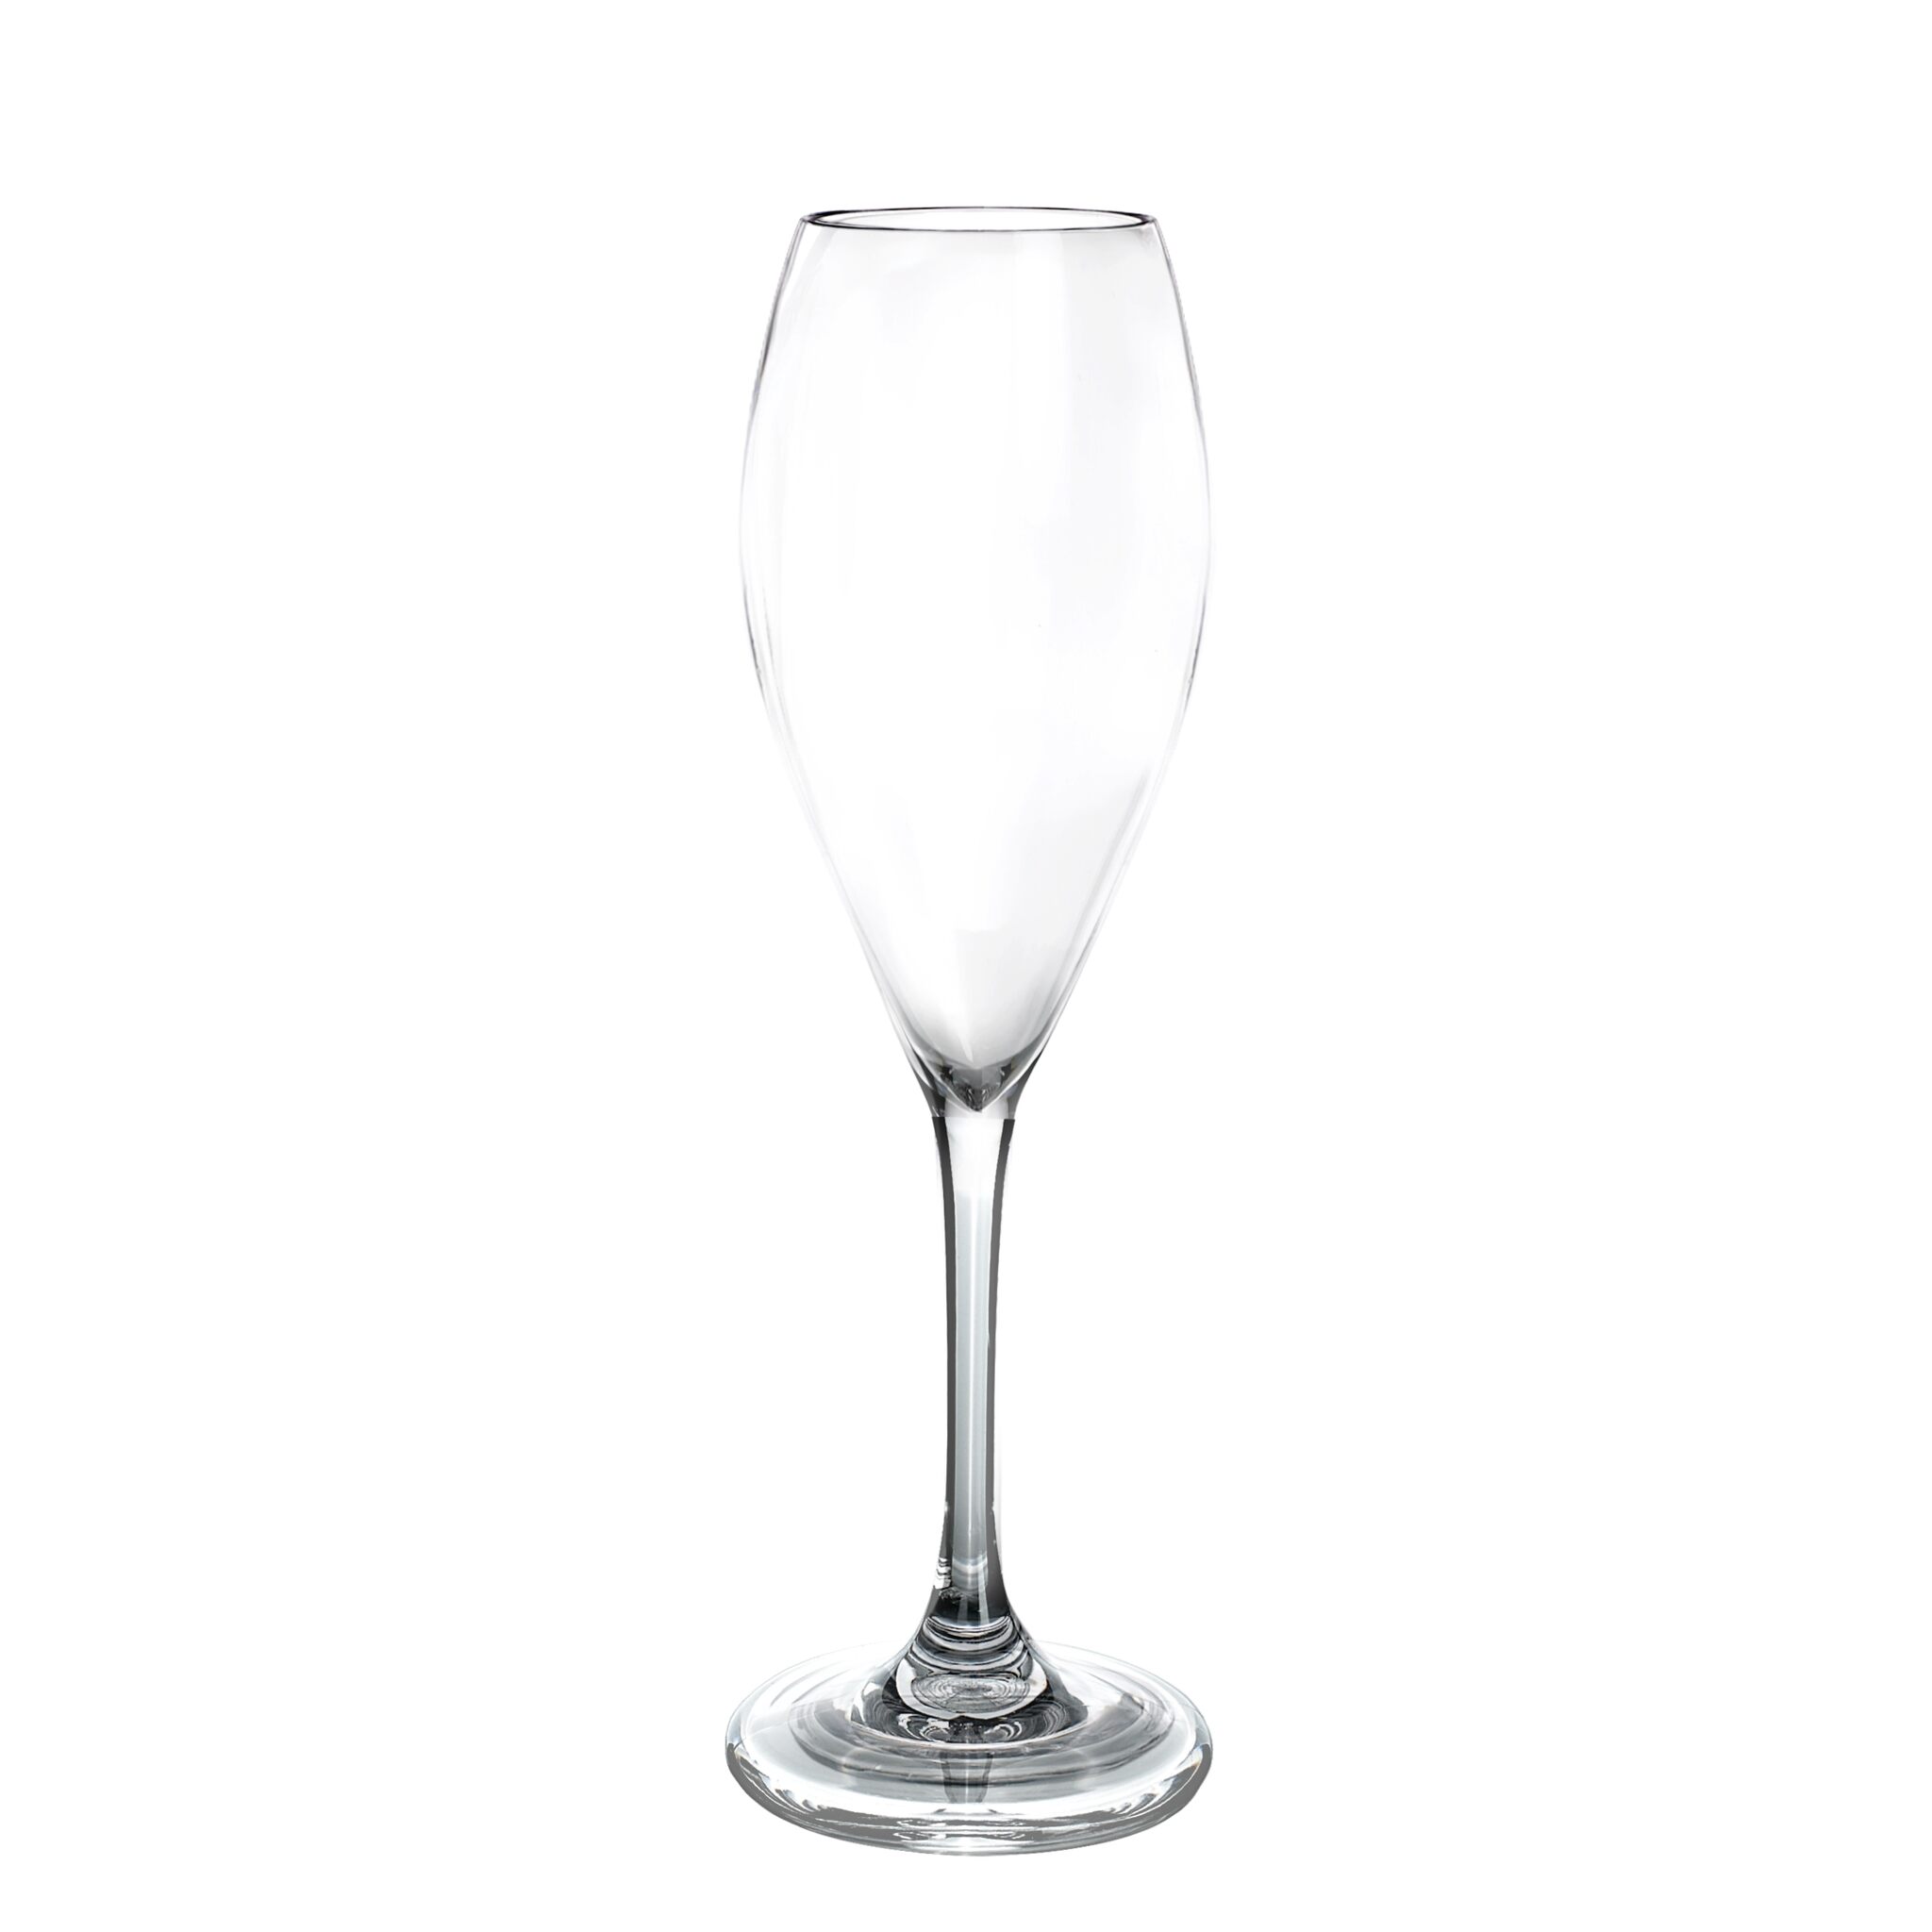 Set of 2 champagne glasses, 20cl